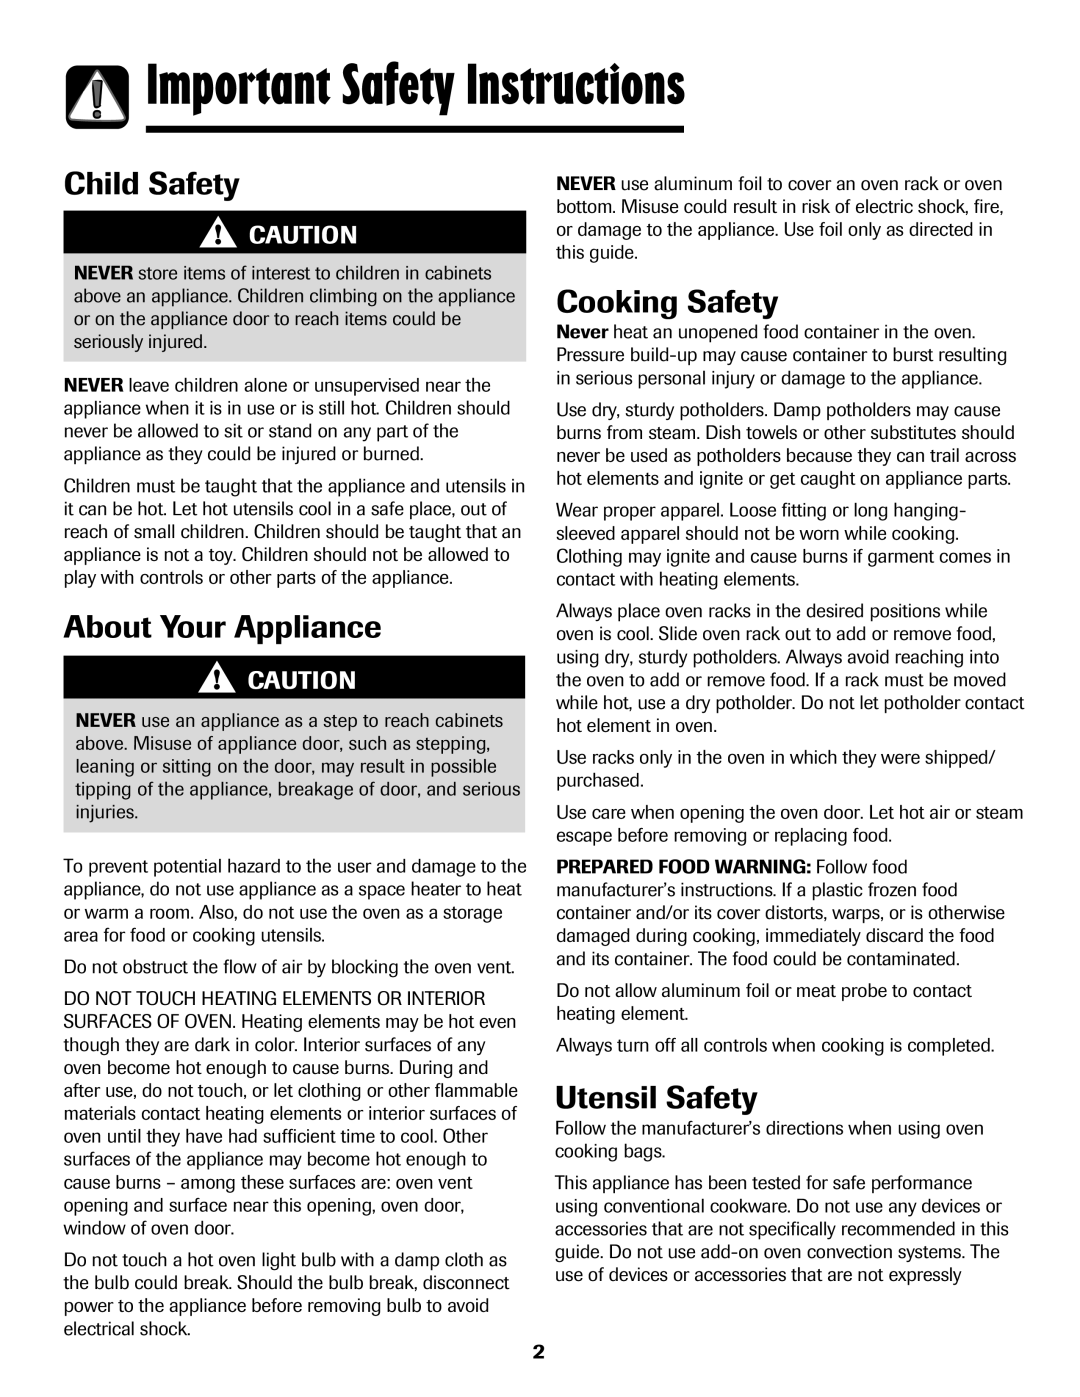 Amana 8113P598-60 manual Important Safety Instructions, Child Safety, About Your Appliance, Cooking Safety, Utensil Safety 